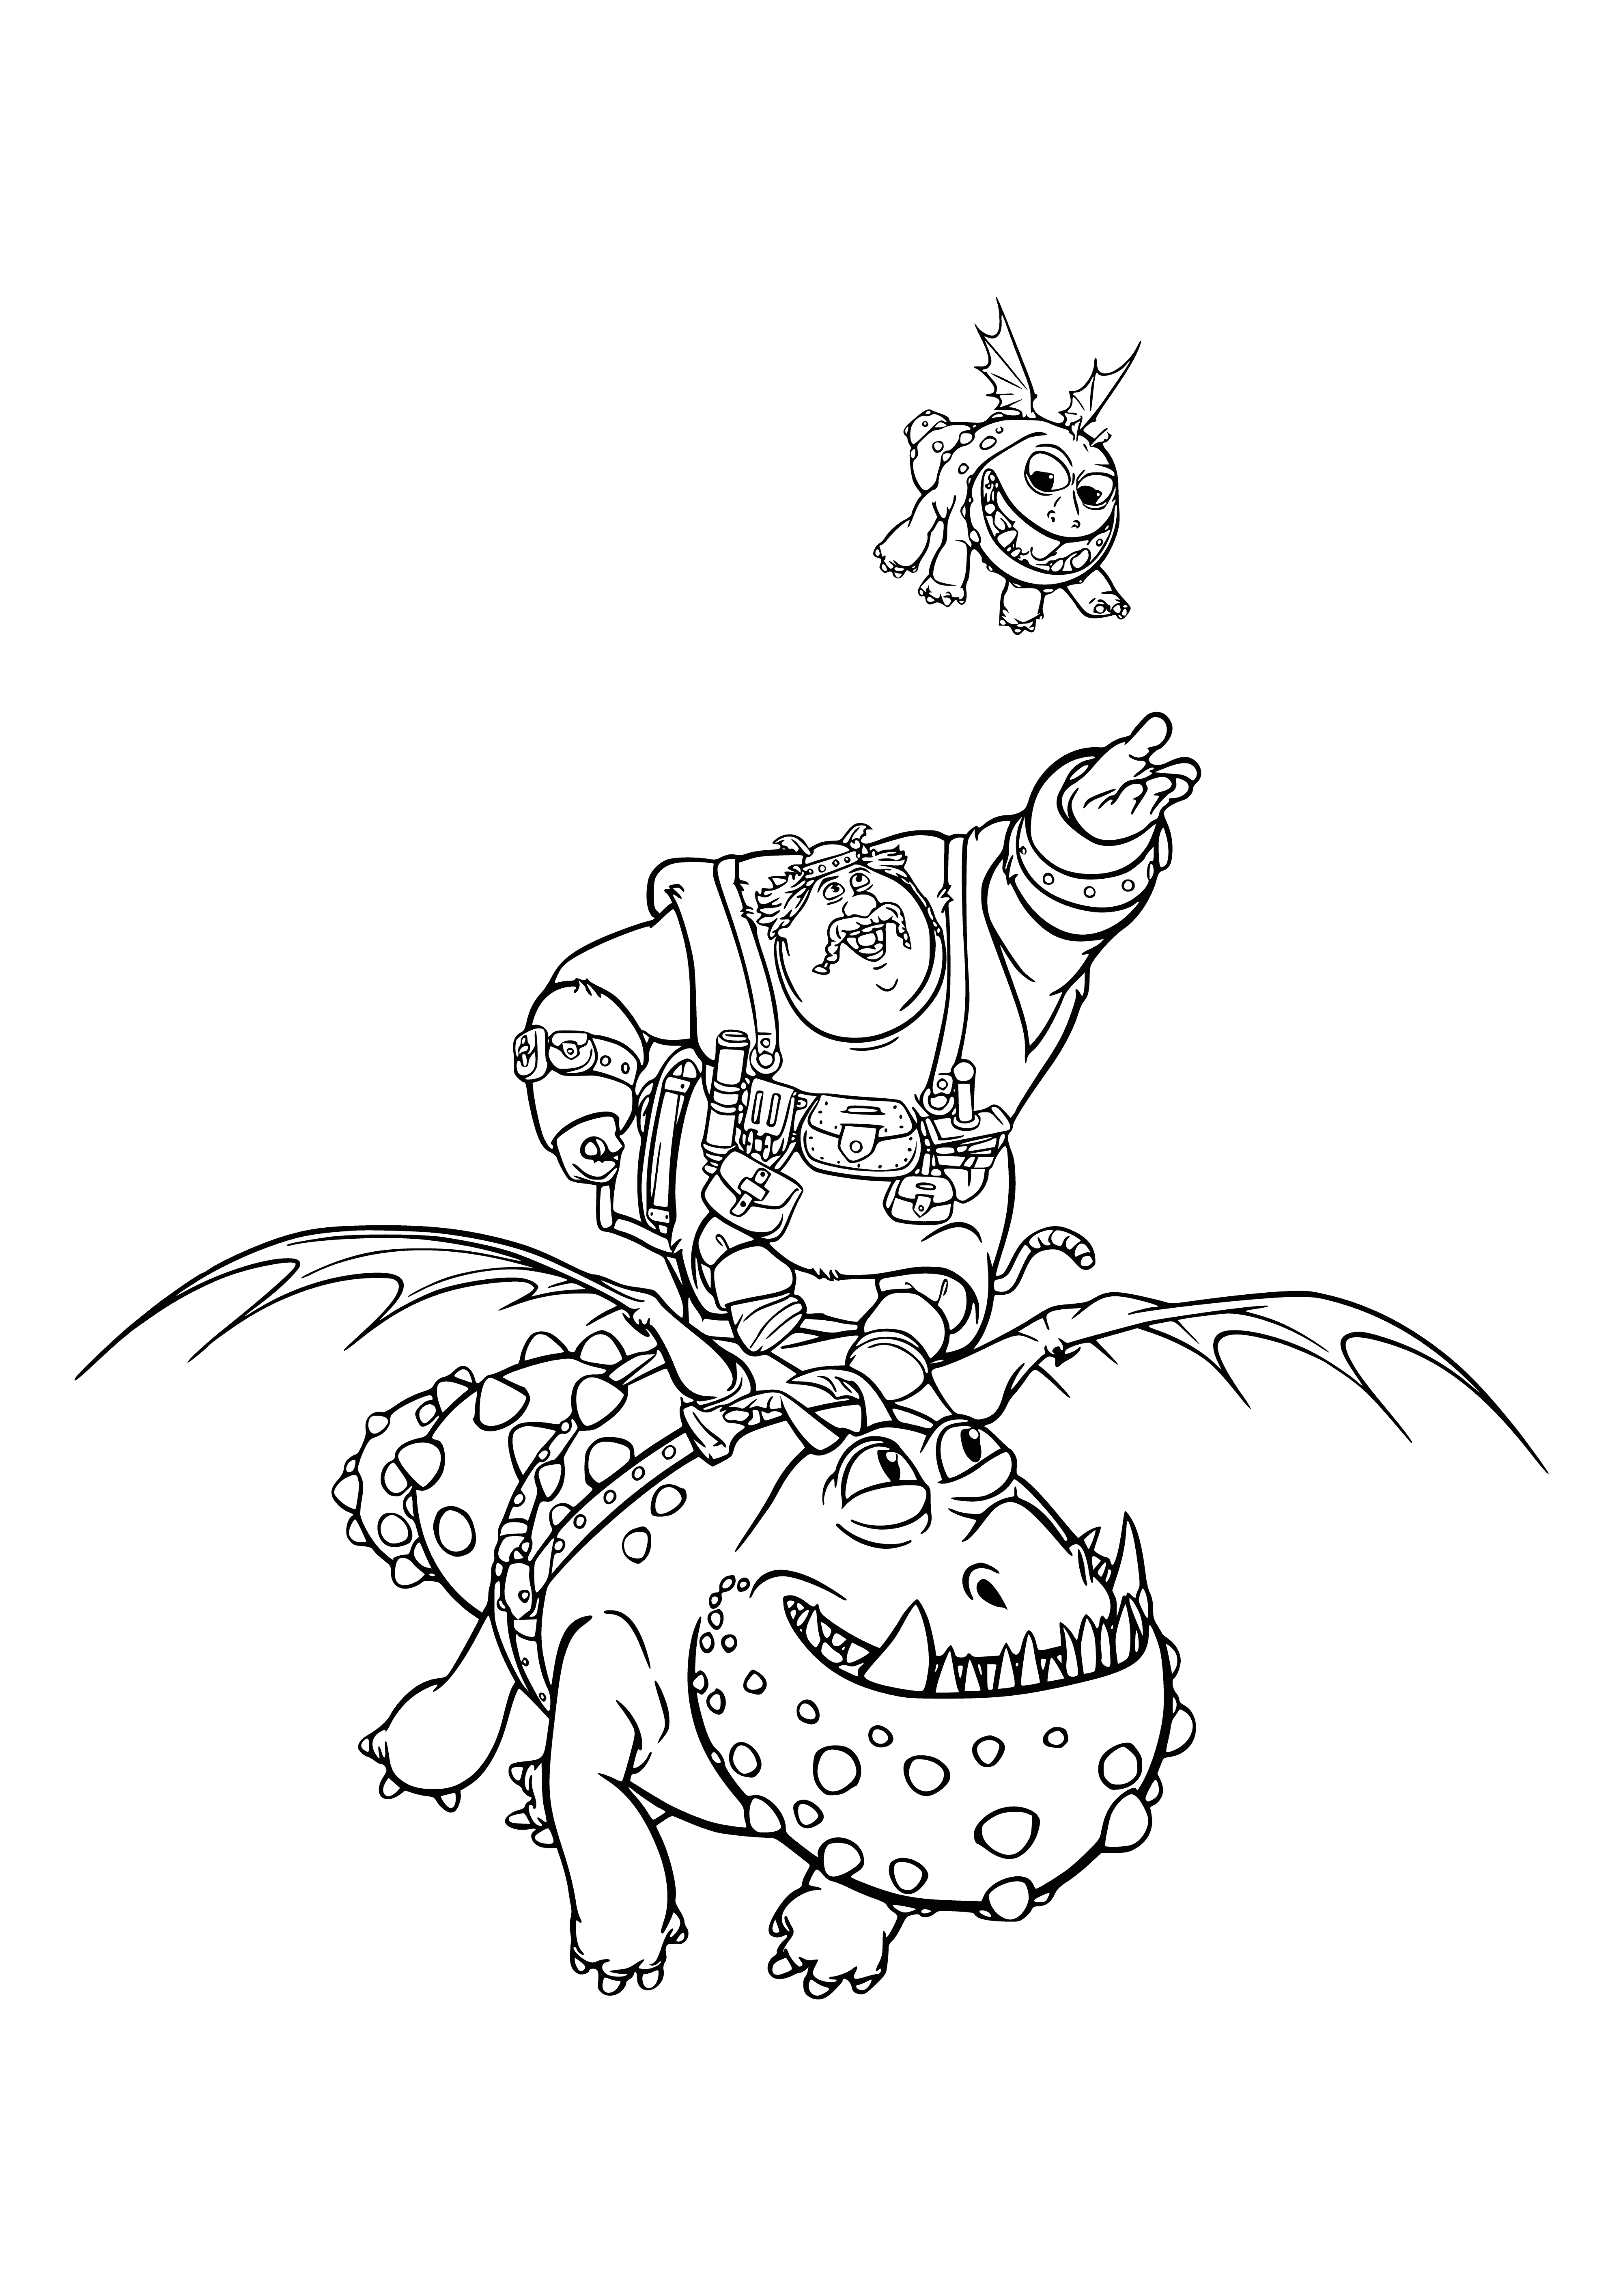 coloring page: Dragon Sardinka flies with fish in mouth; fish still alive, flapping fins frantically.